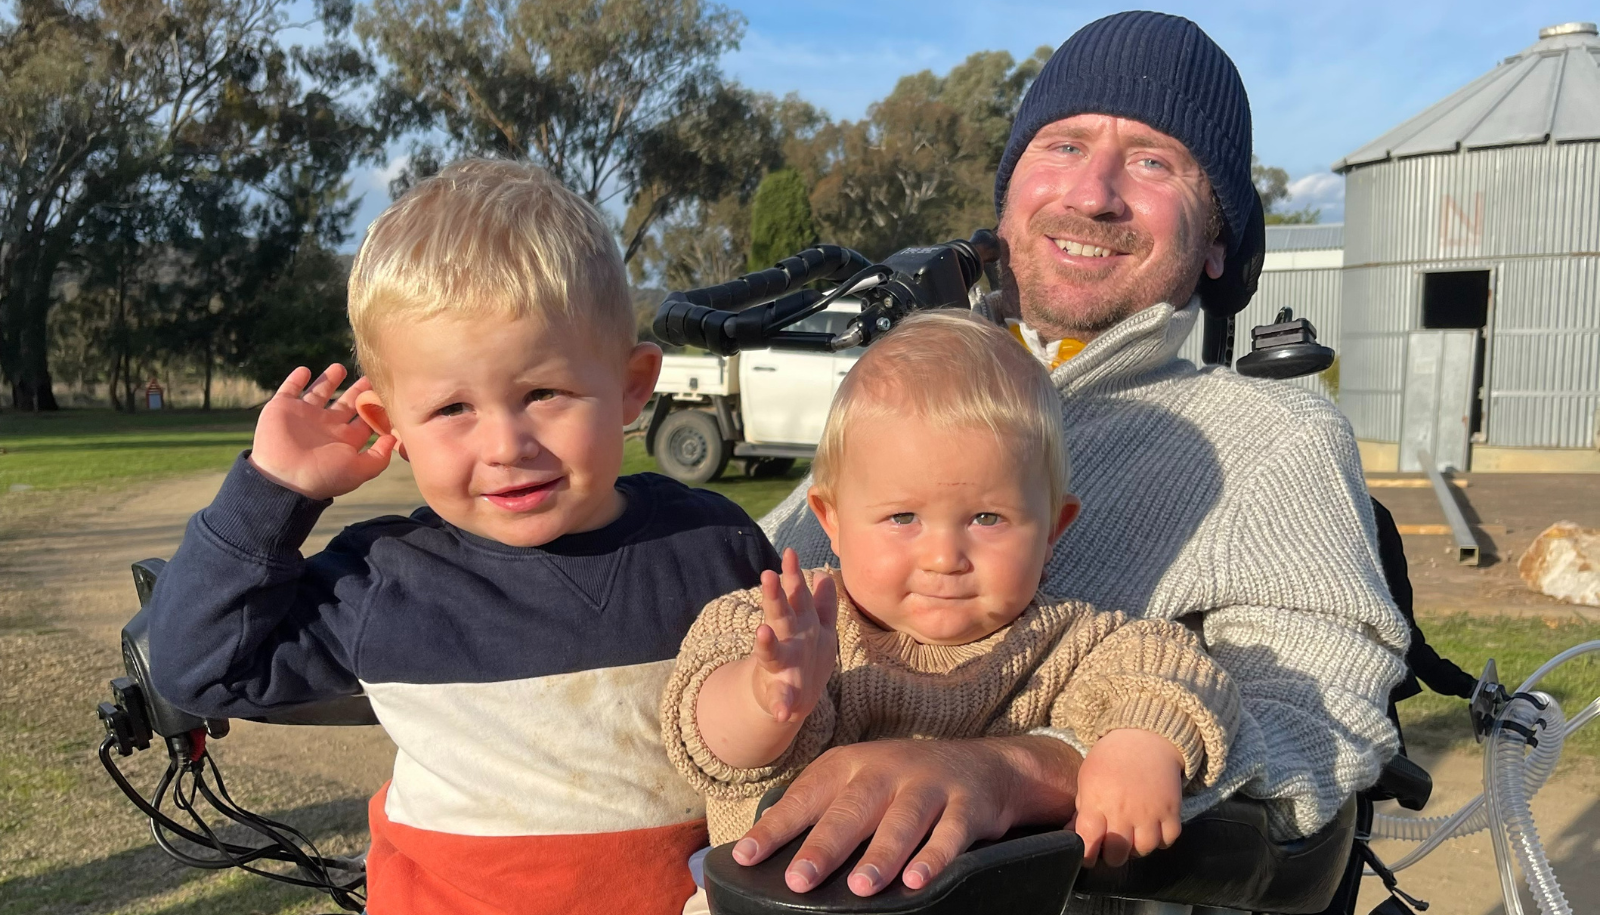 Nathan Stapleton is in a wheelchair outdoors at a farm with his two sons sitting on his lap